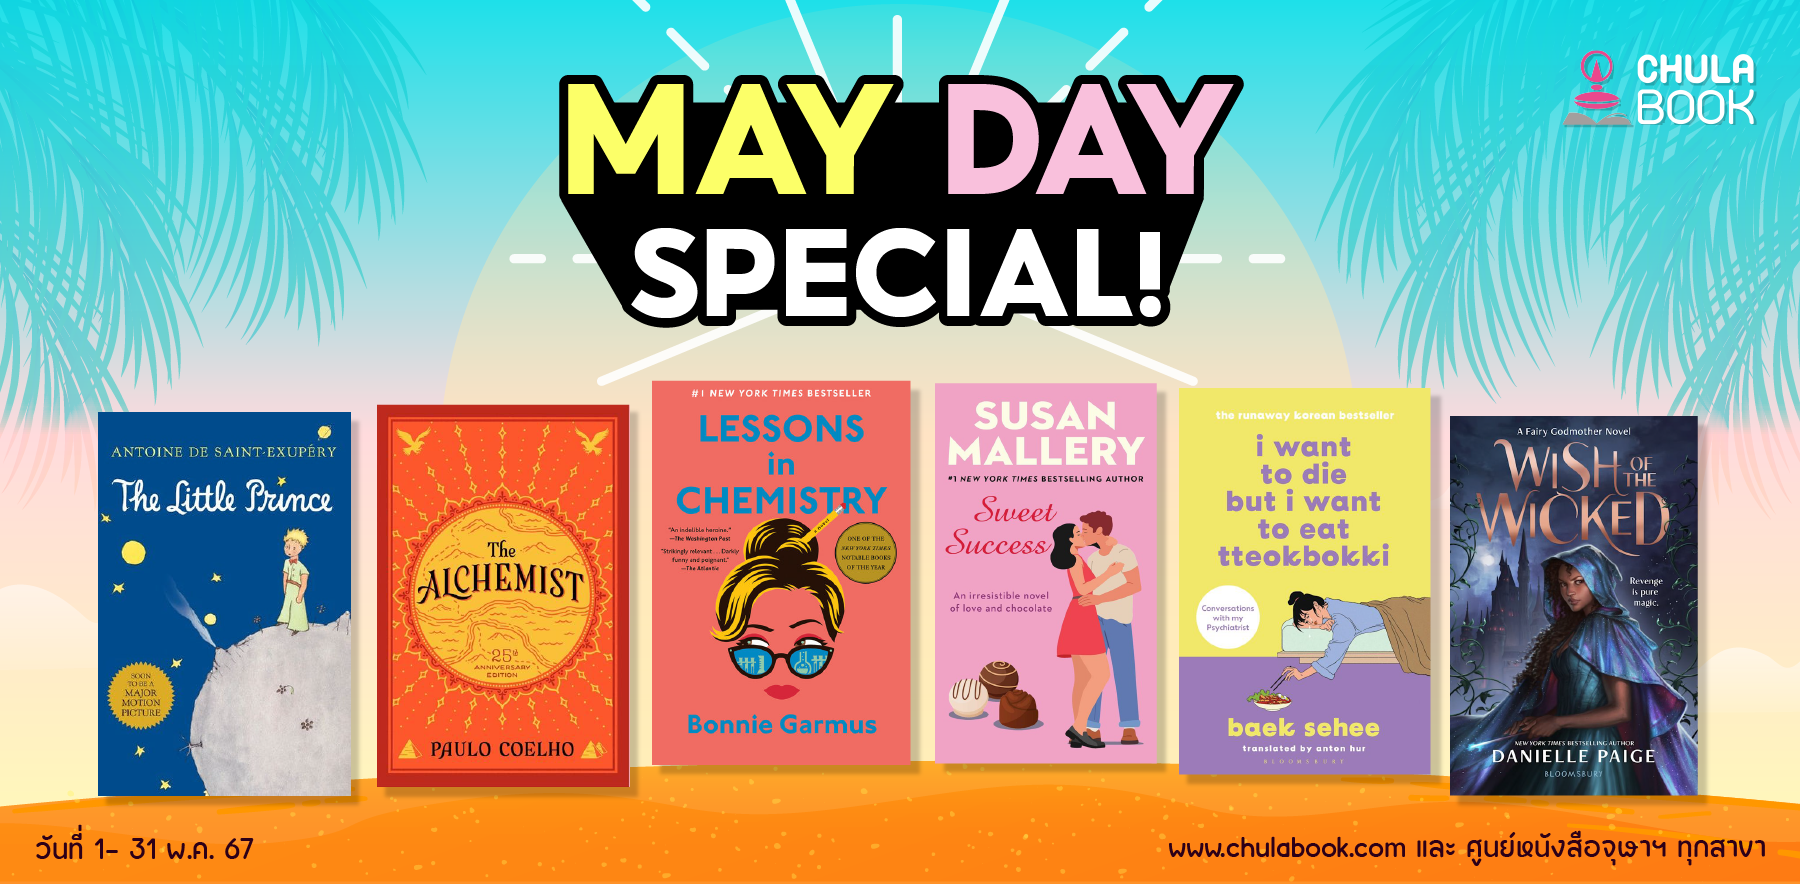 MAY DAY SPECIAL!